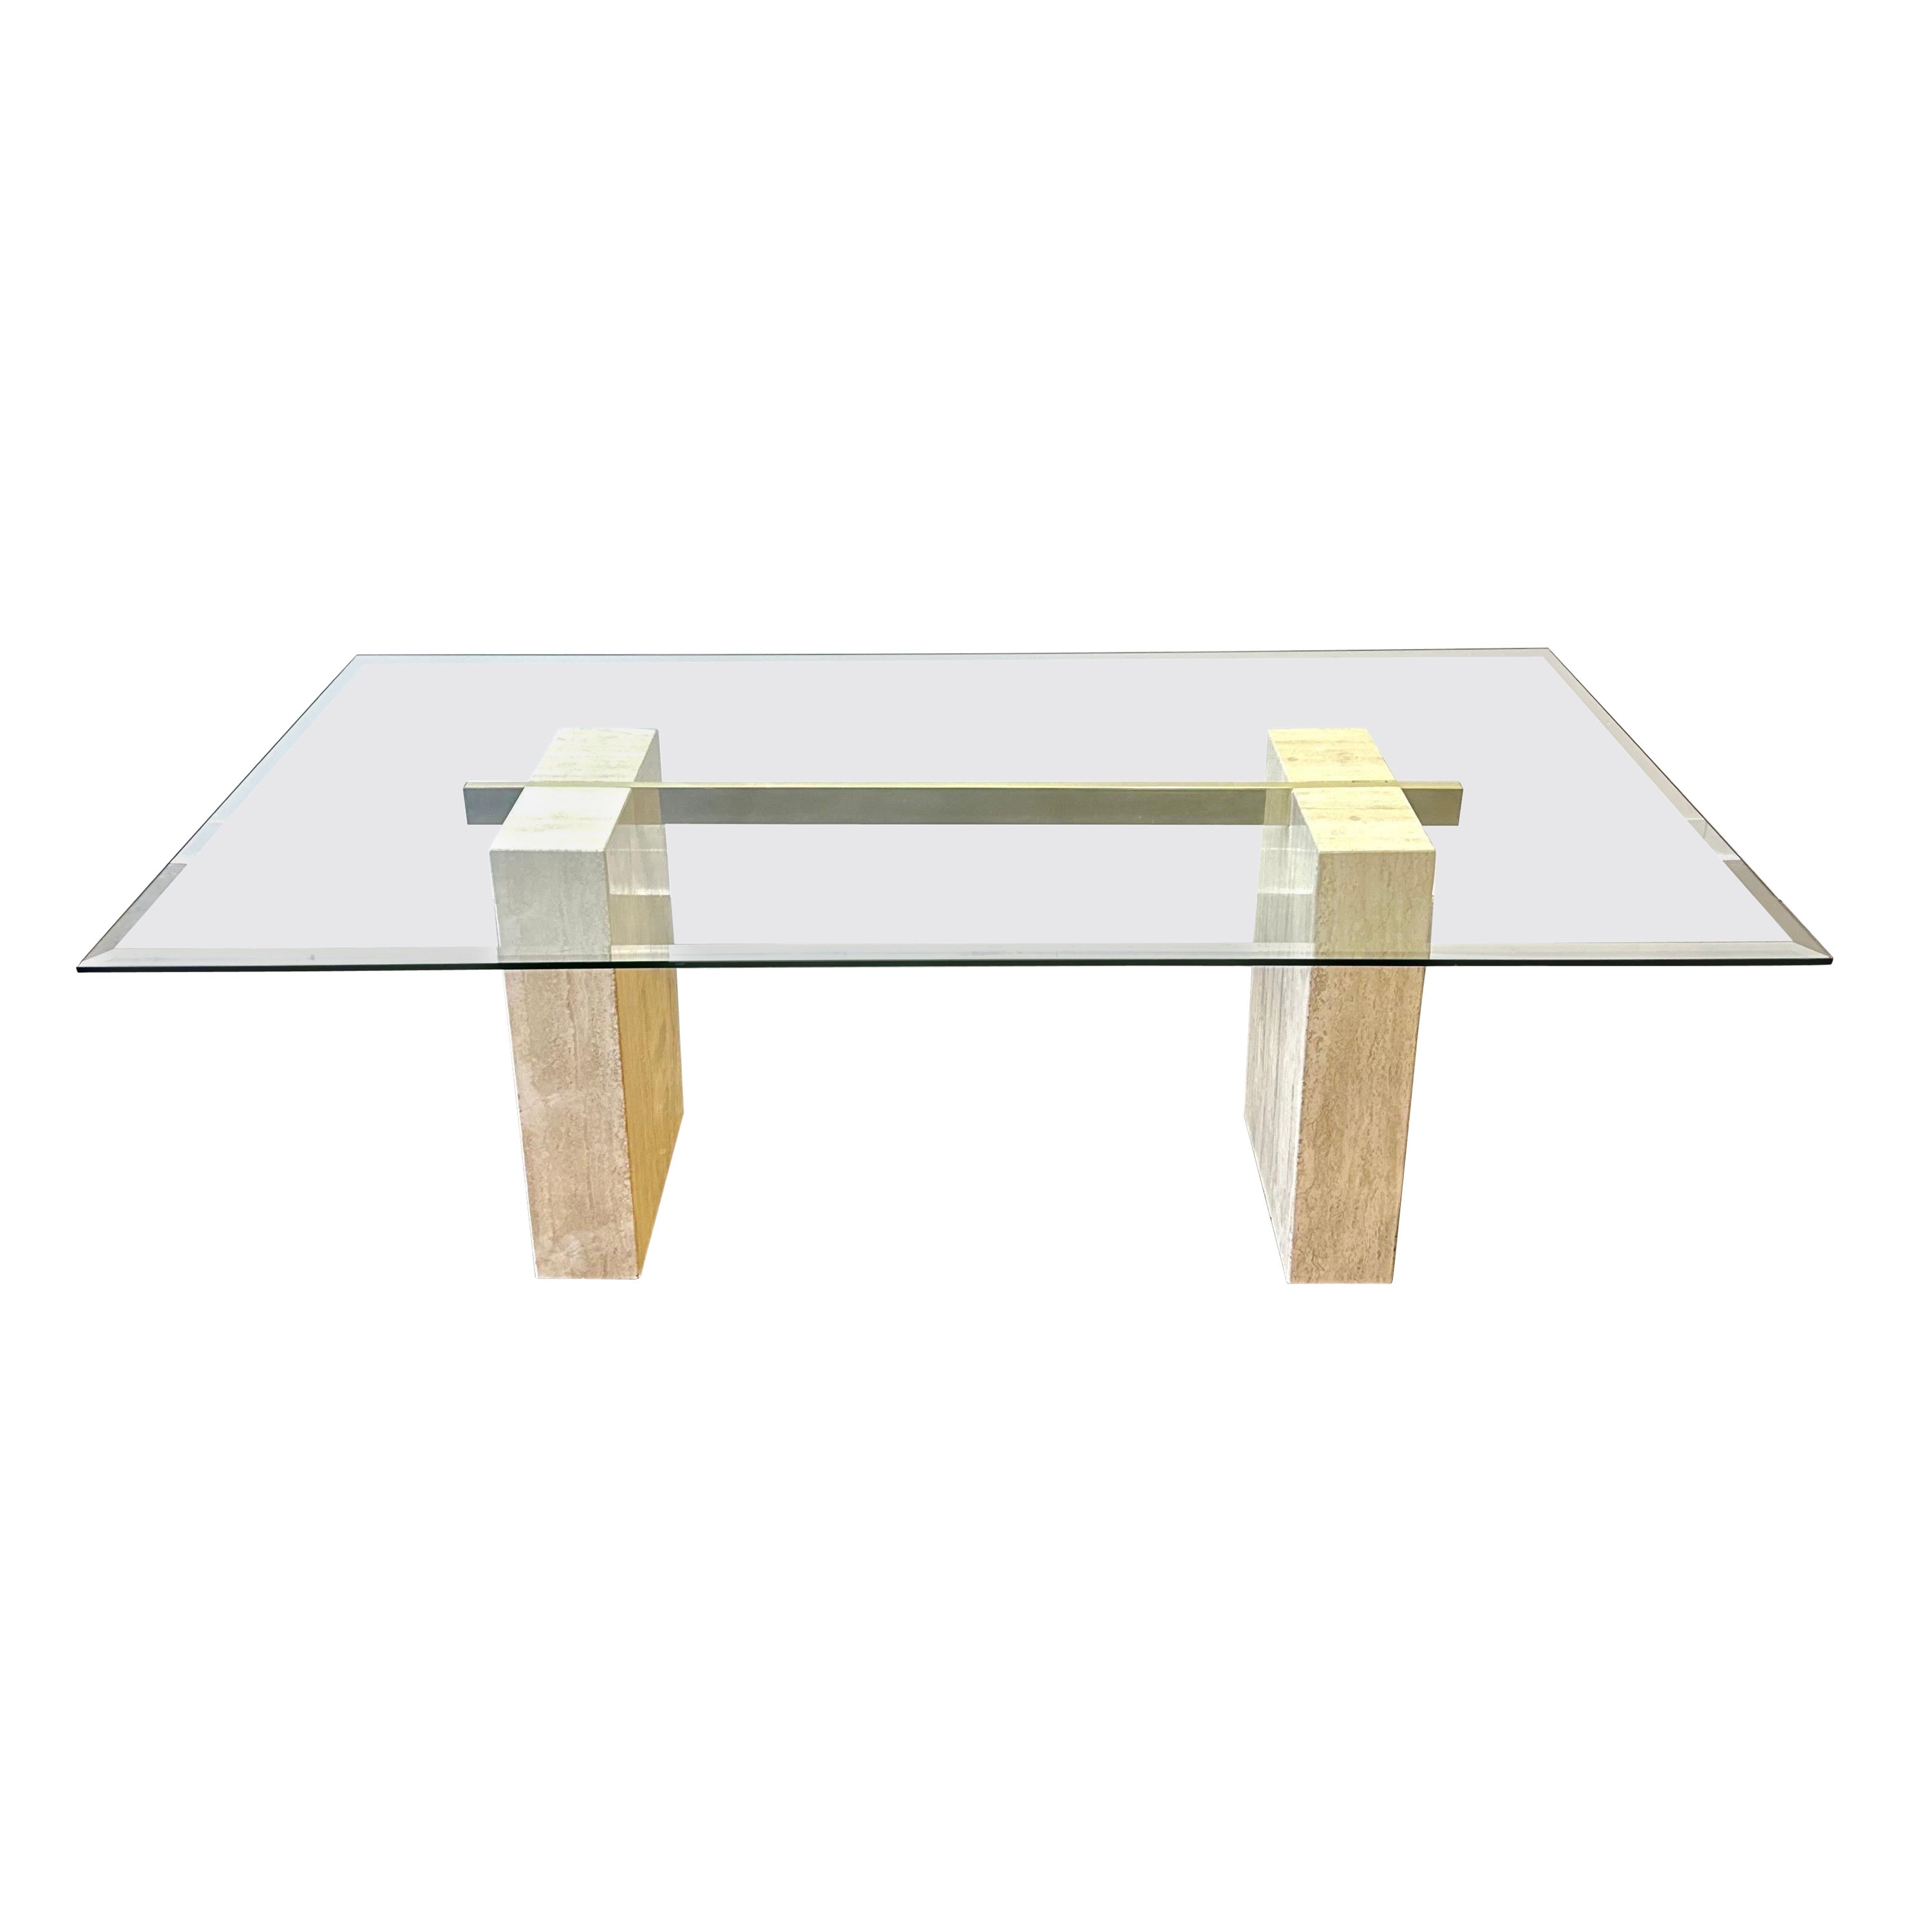 1970s Guy Barker for Ello Travertine Dining Table with Glass Top For Sale